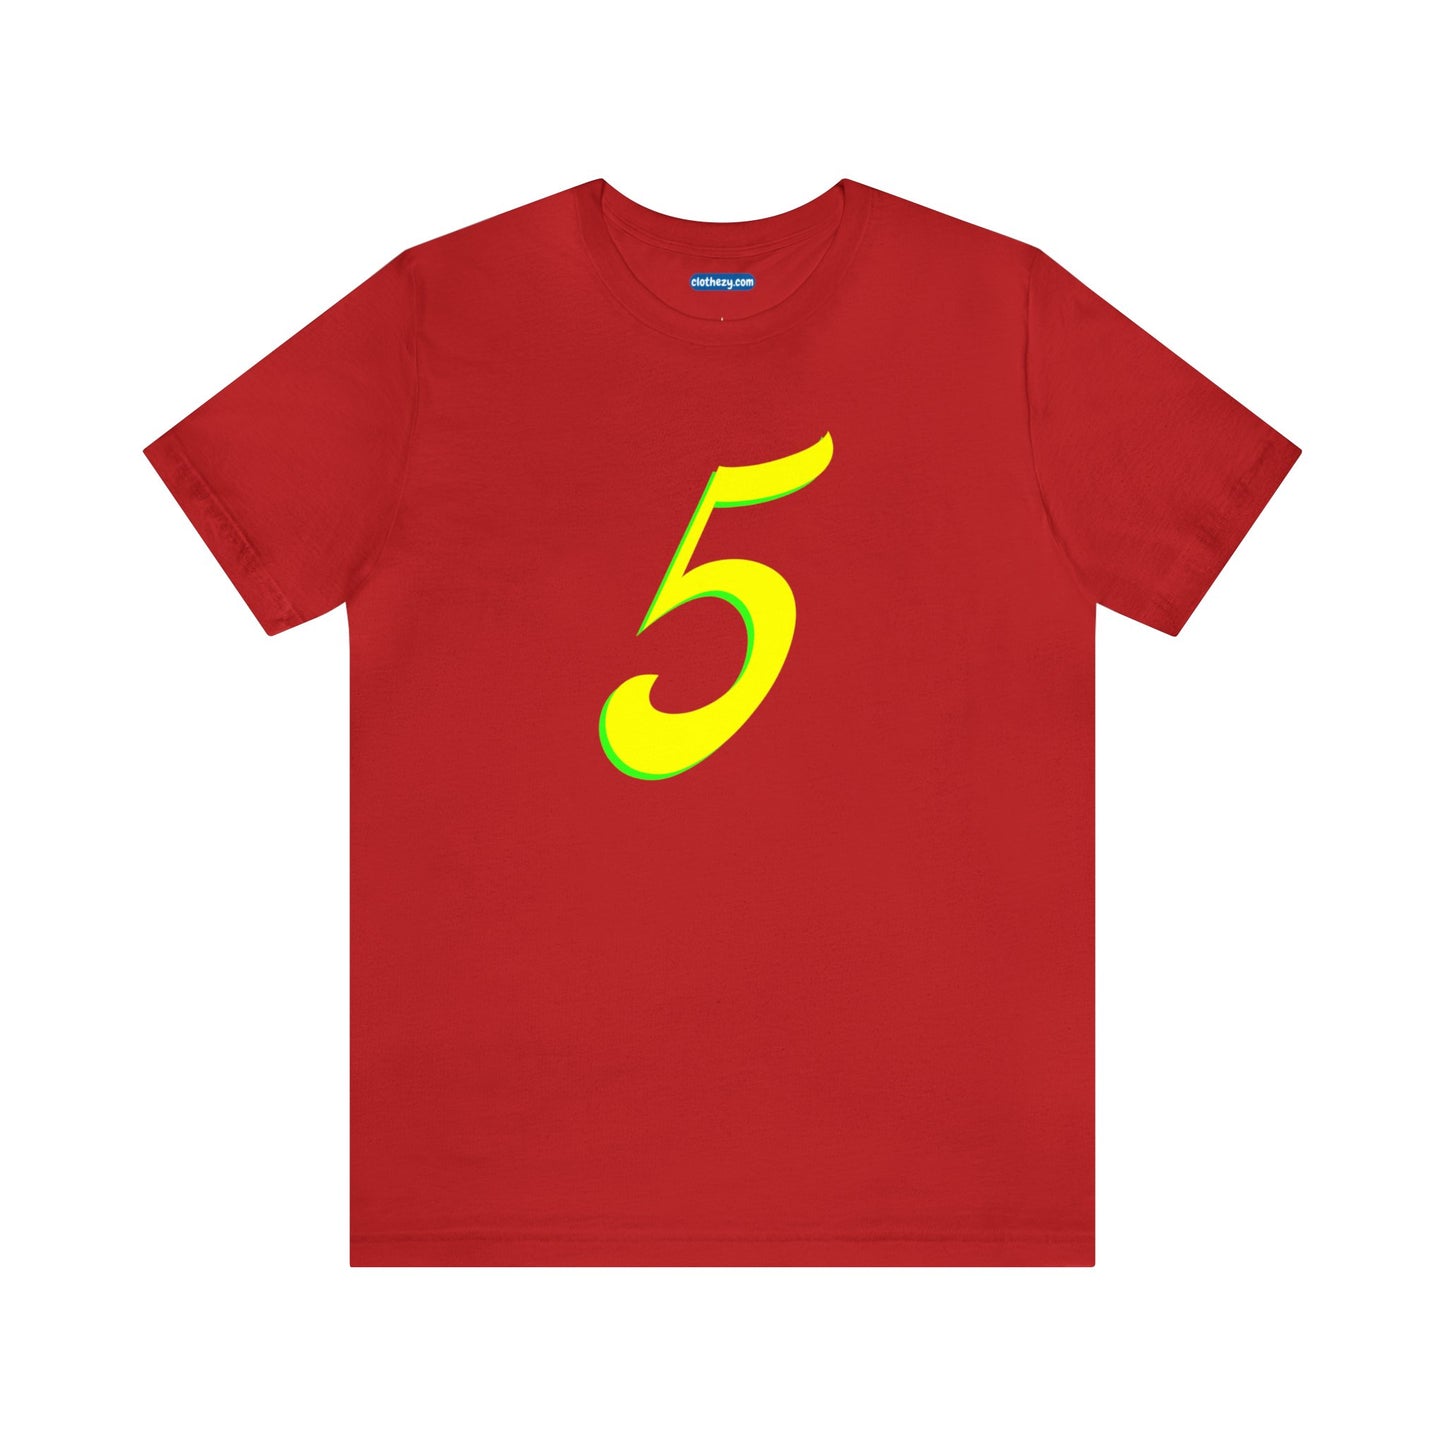 Number 5 Design - Soft Cotton Tee for birthdays and celebrations, Gift for friends and family, Multiple Options by clothezy.com in Red Size Small - Buy Now